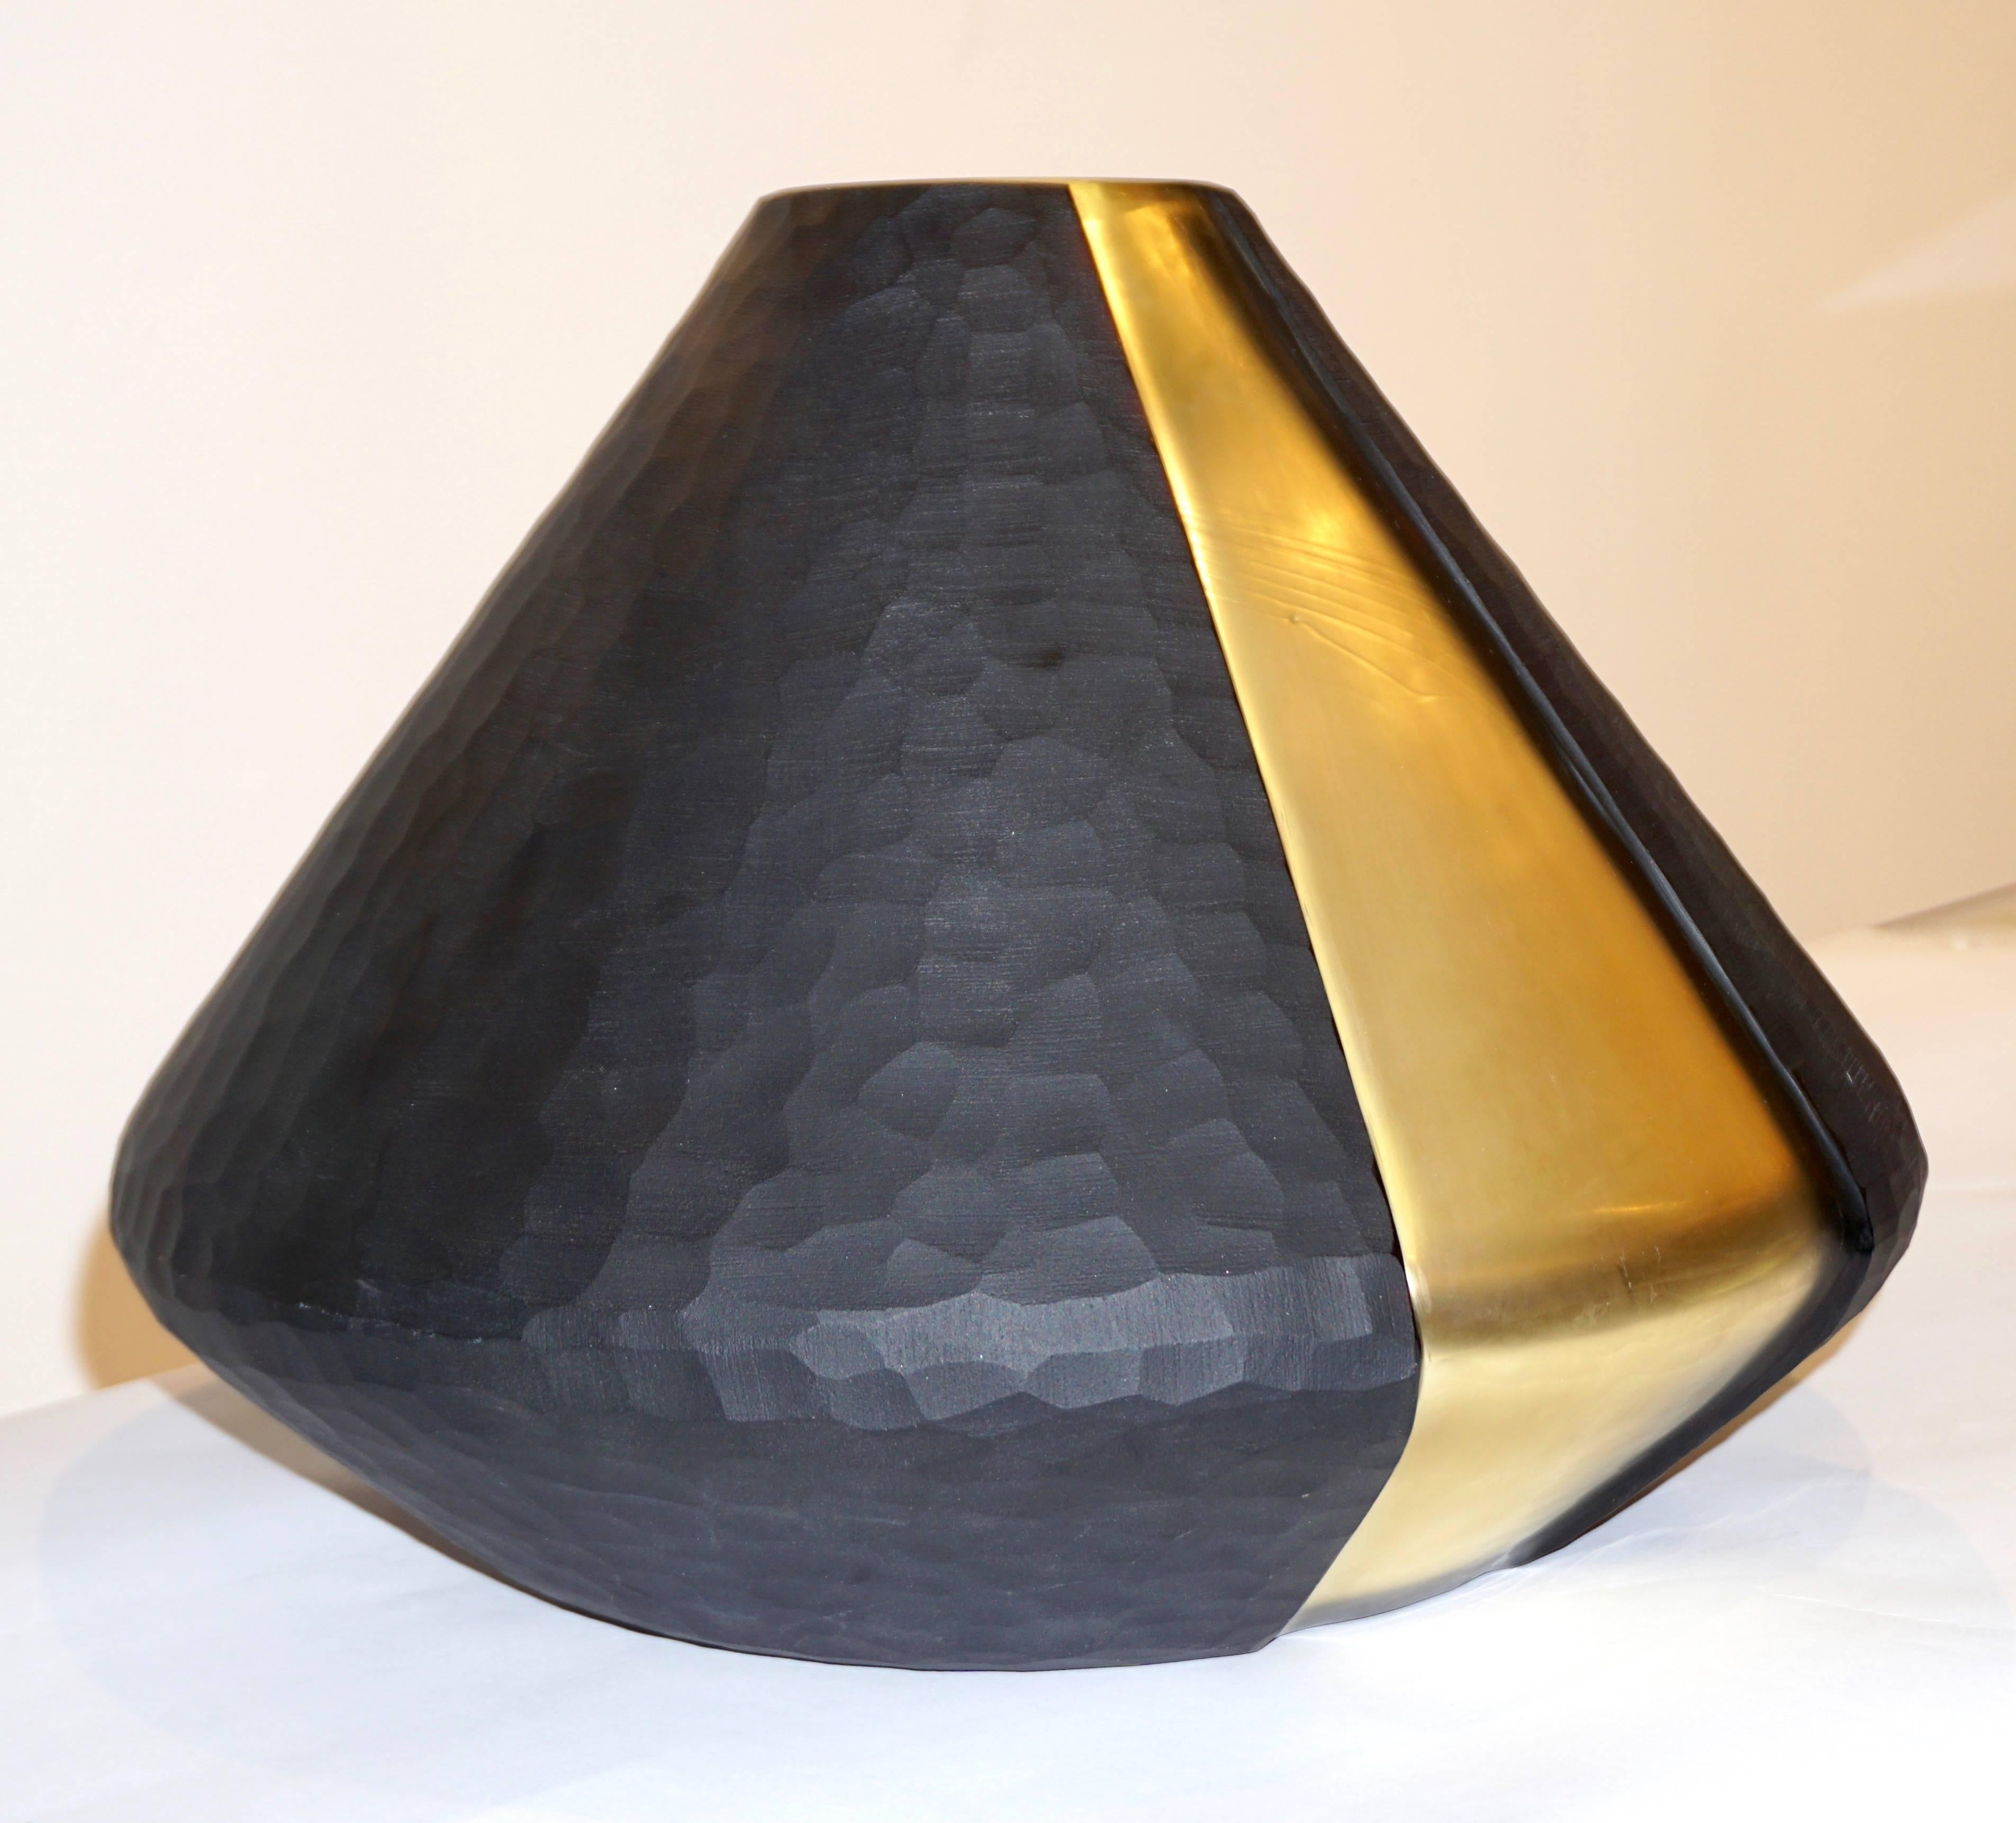 Sexy and modern Italian design grand vases in blown Murano art glass, sold separately. The elegant organic design is highlighted by an intramural cascade of gold, the sophisticated overlaid opaque black glass is worked with the Battuto technique